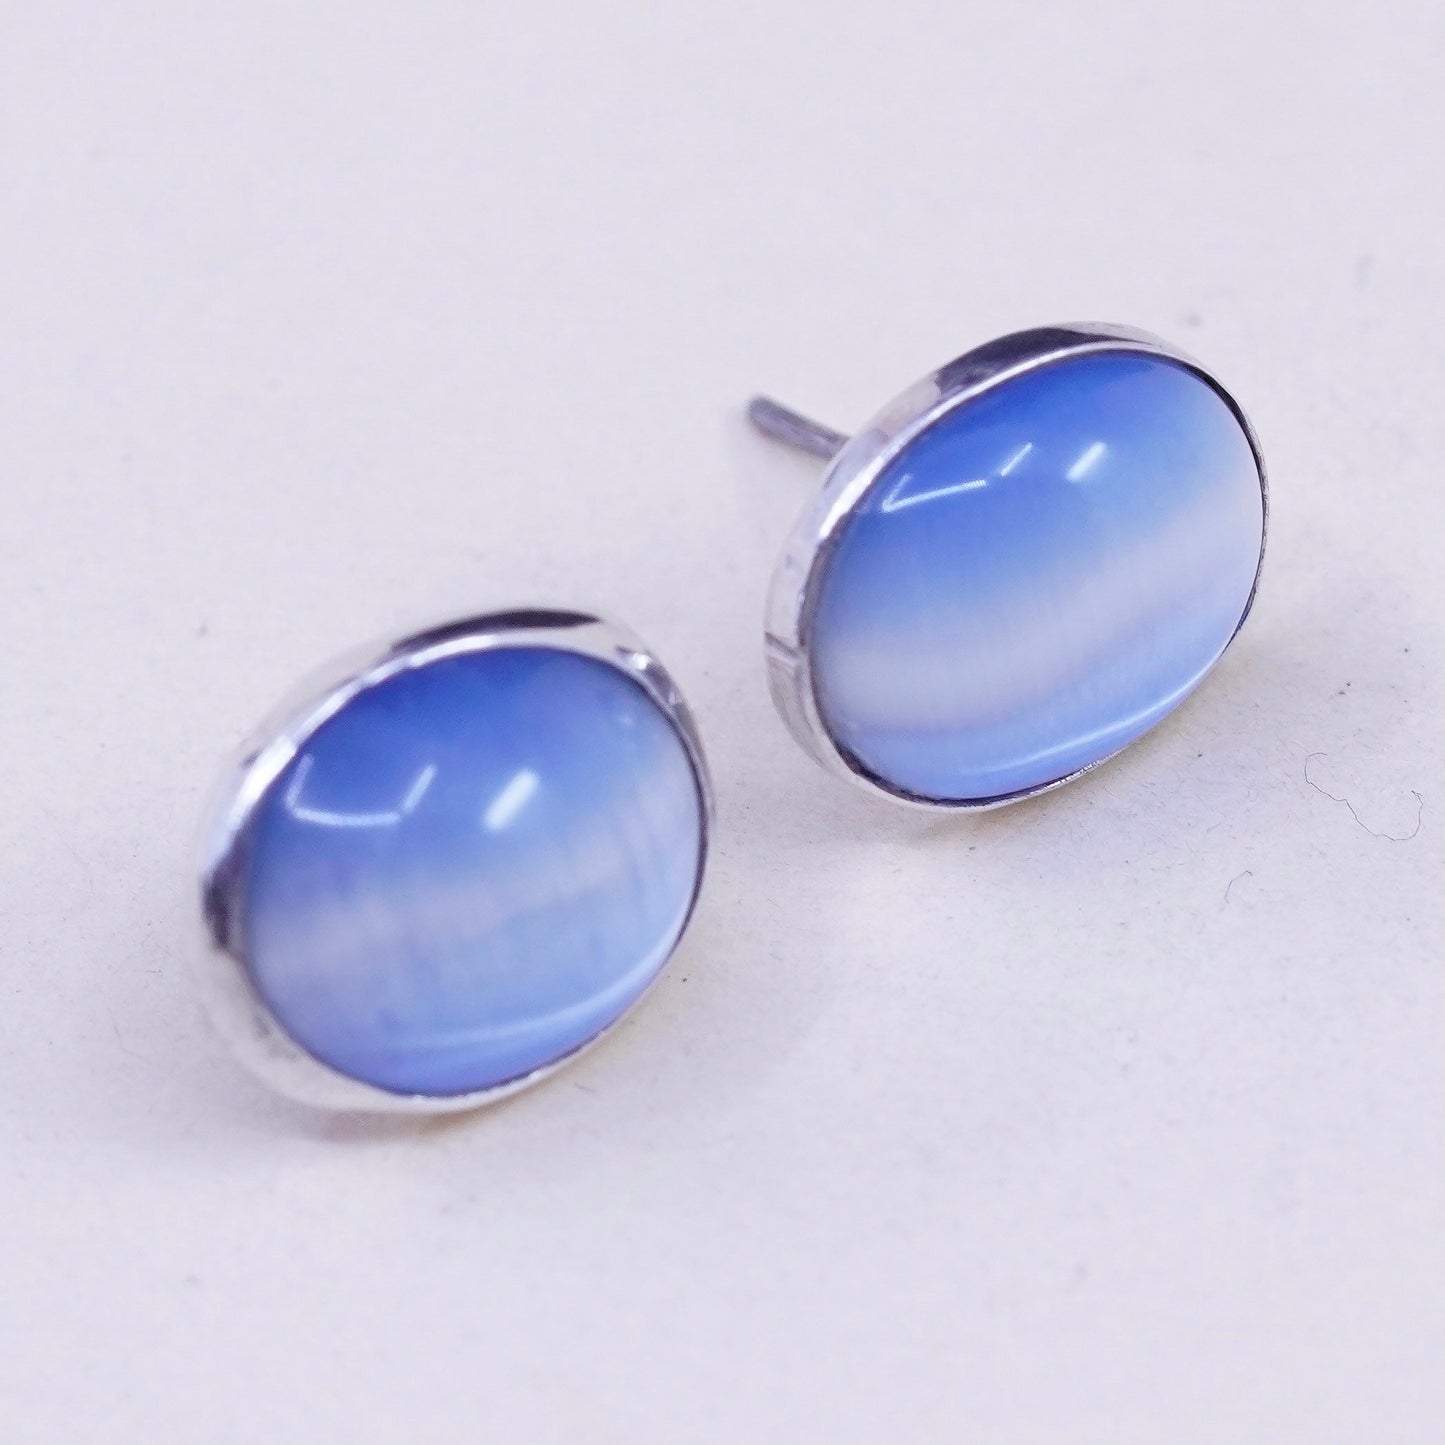 Vintage sterling silver earrings, 925 studs with blue cats eye